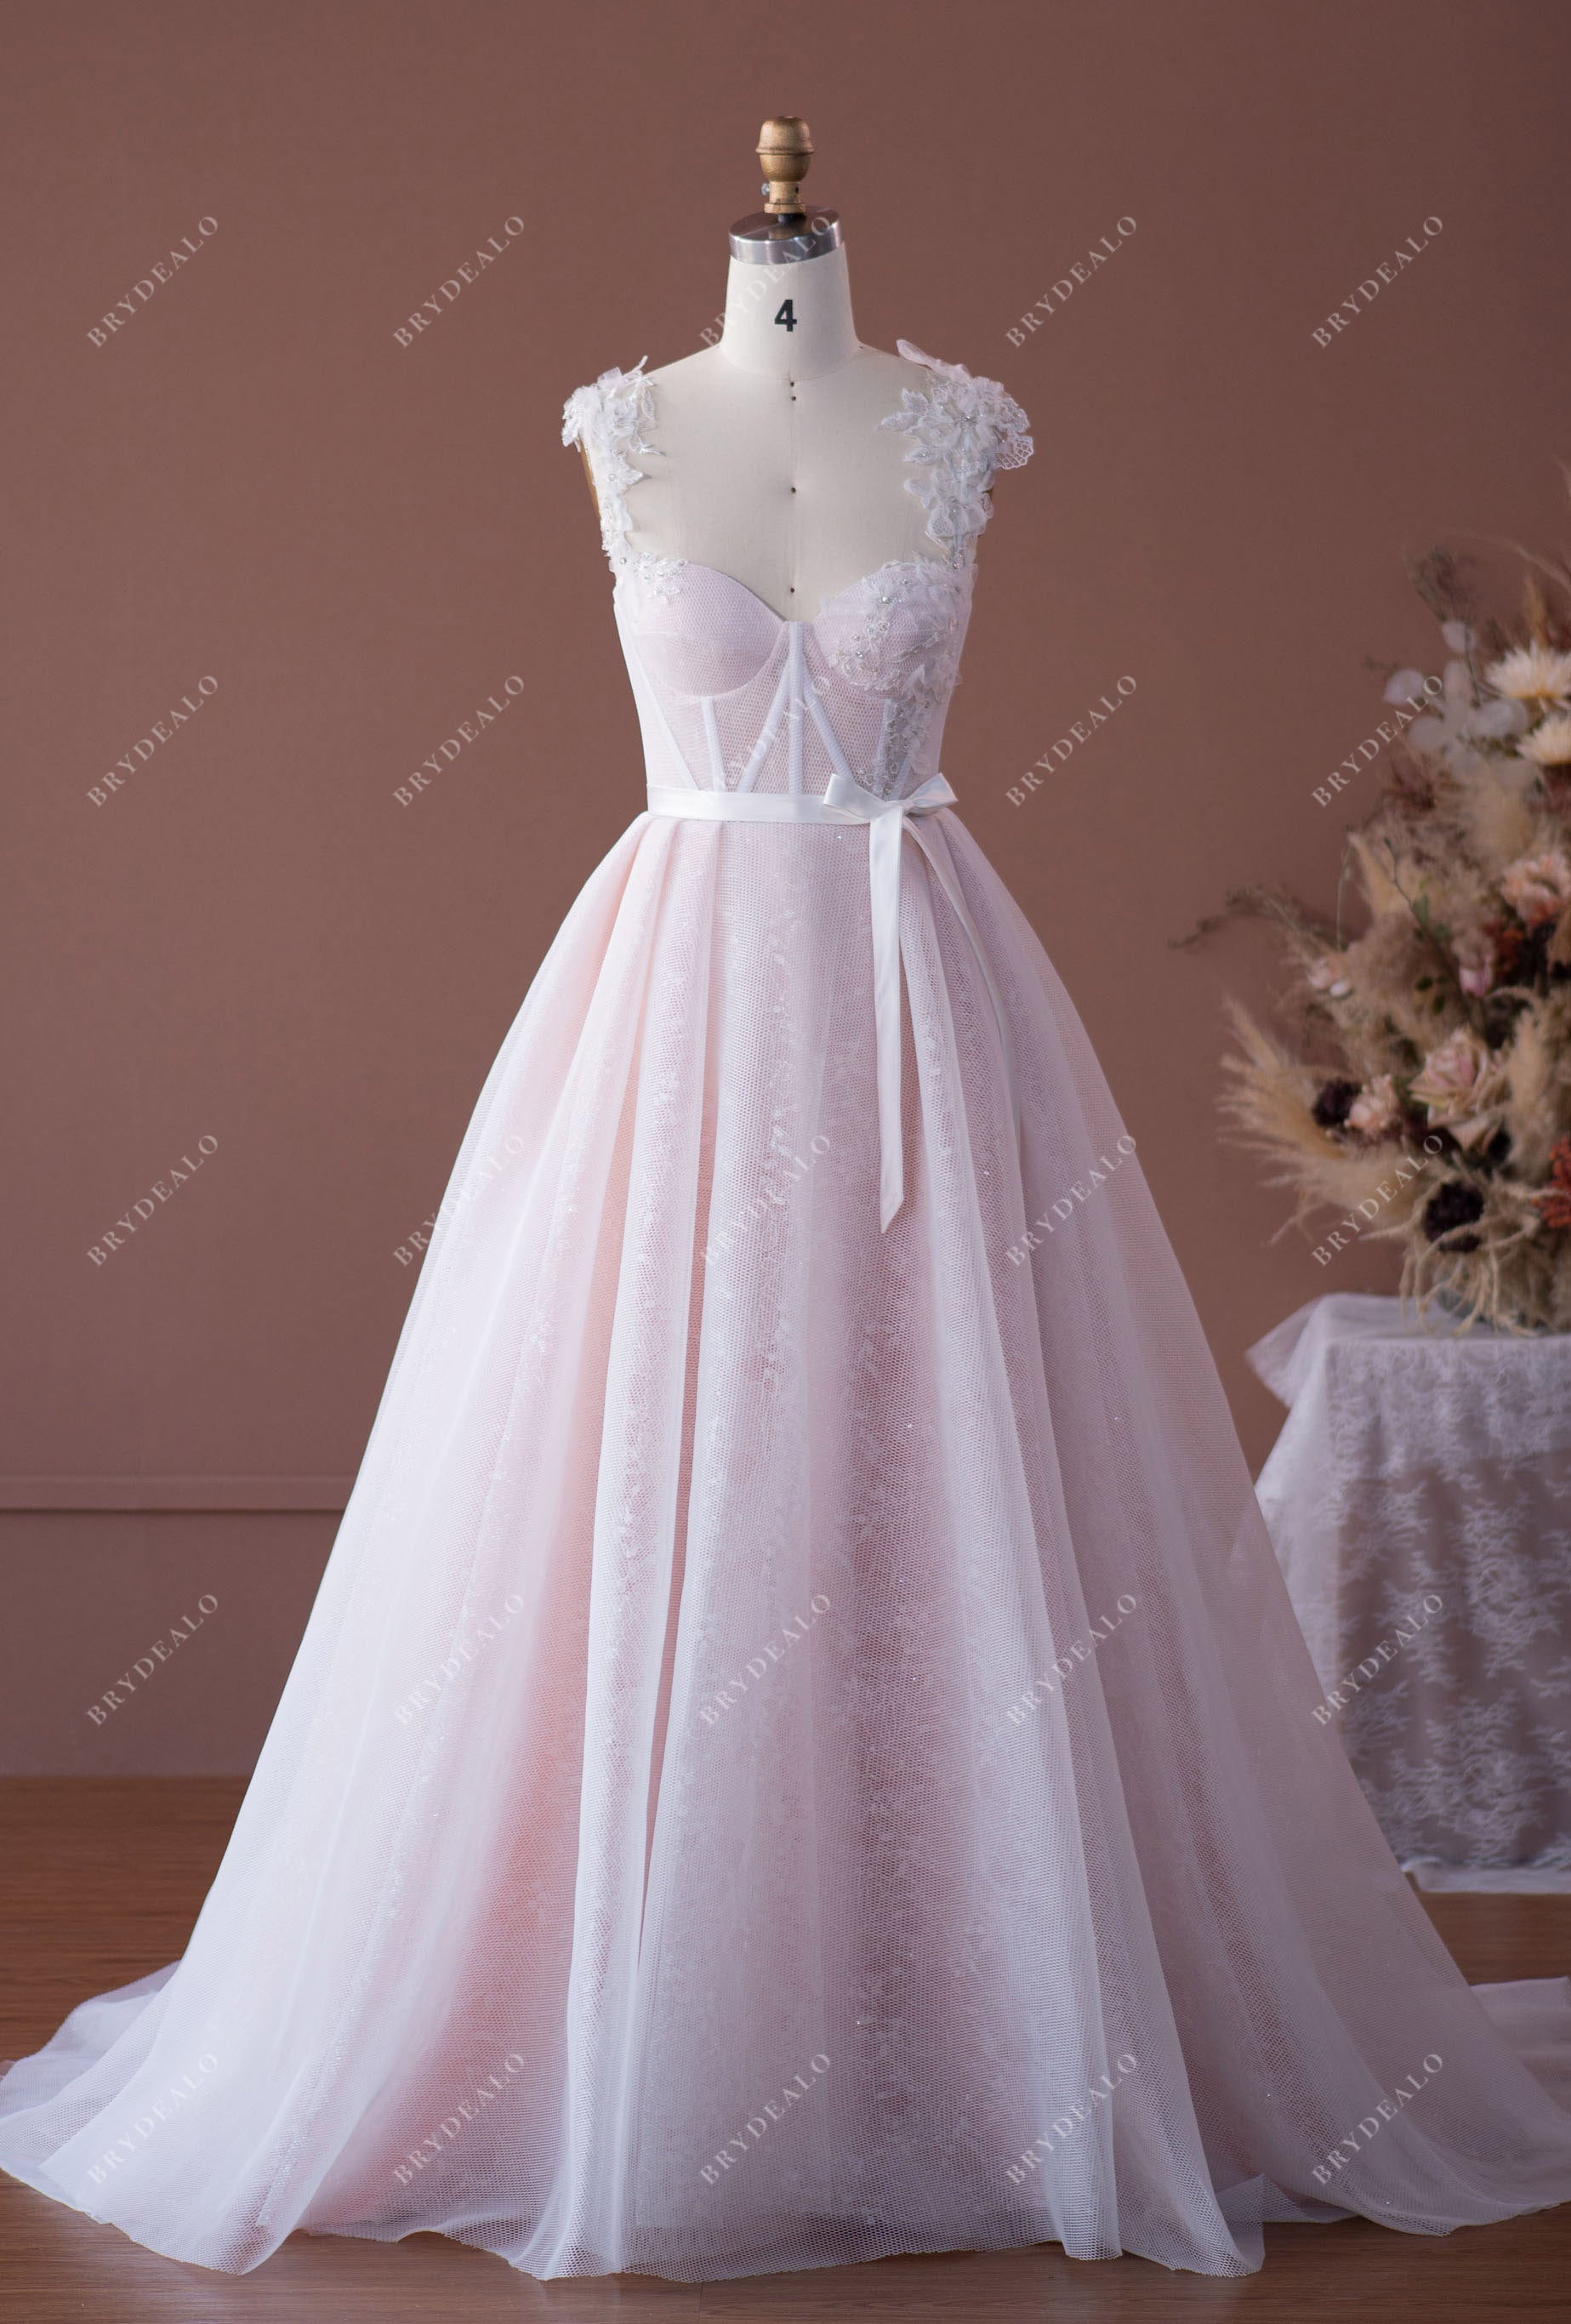 Sweetheart Neck Lace Straps Pinkish Corset Bridal Gown